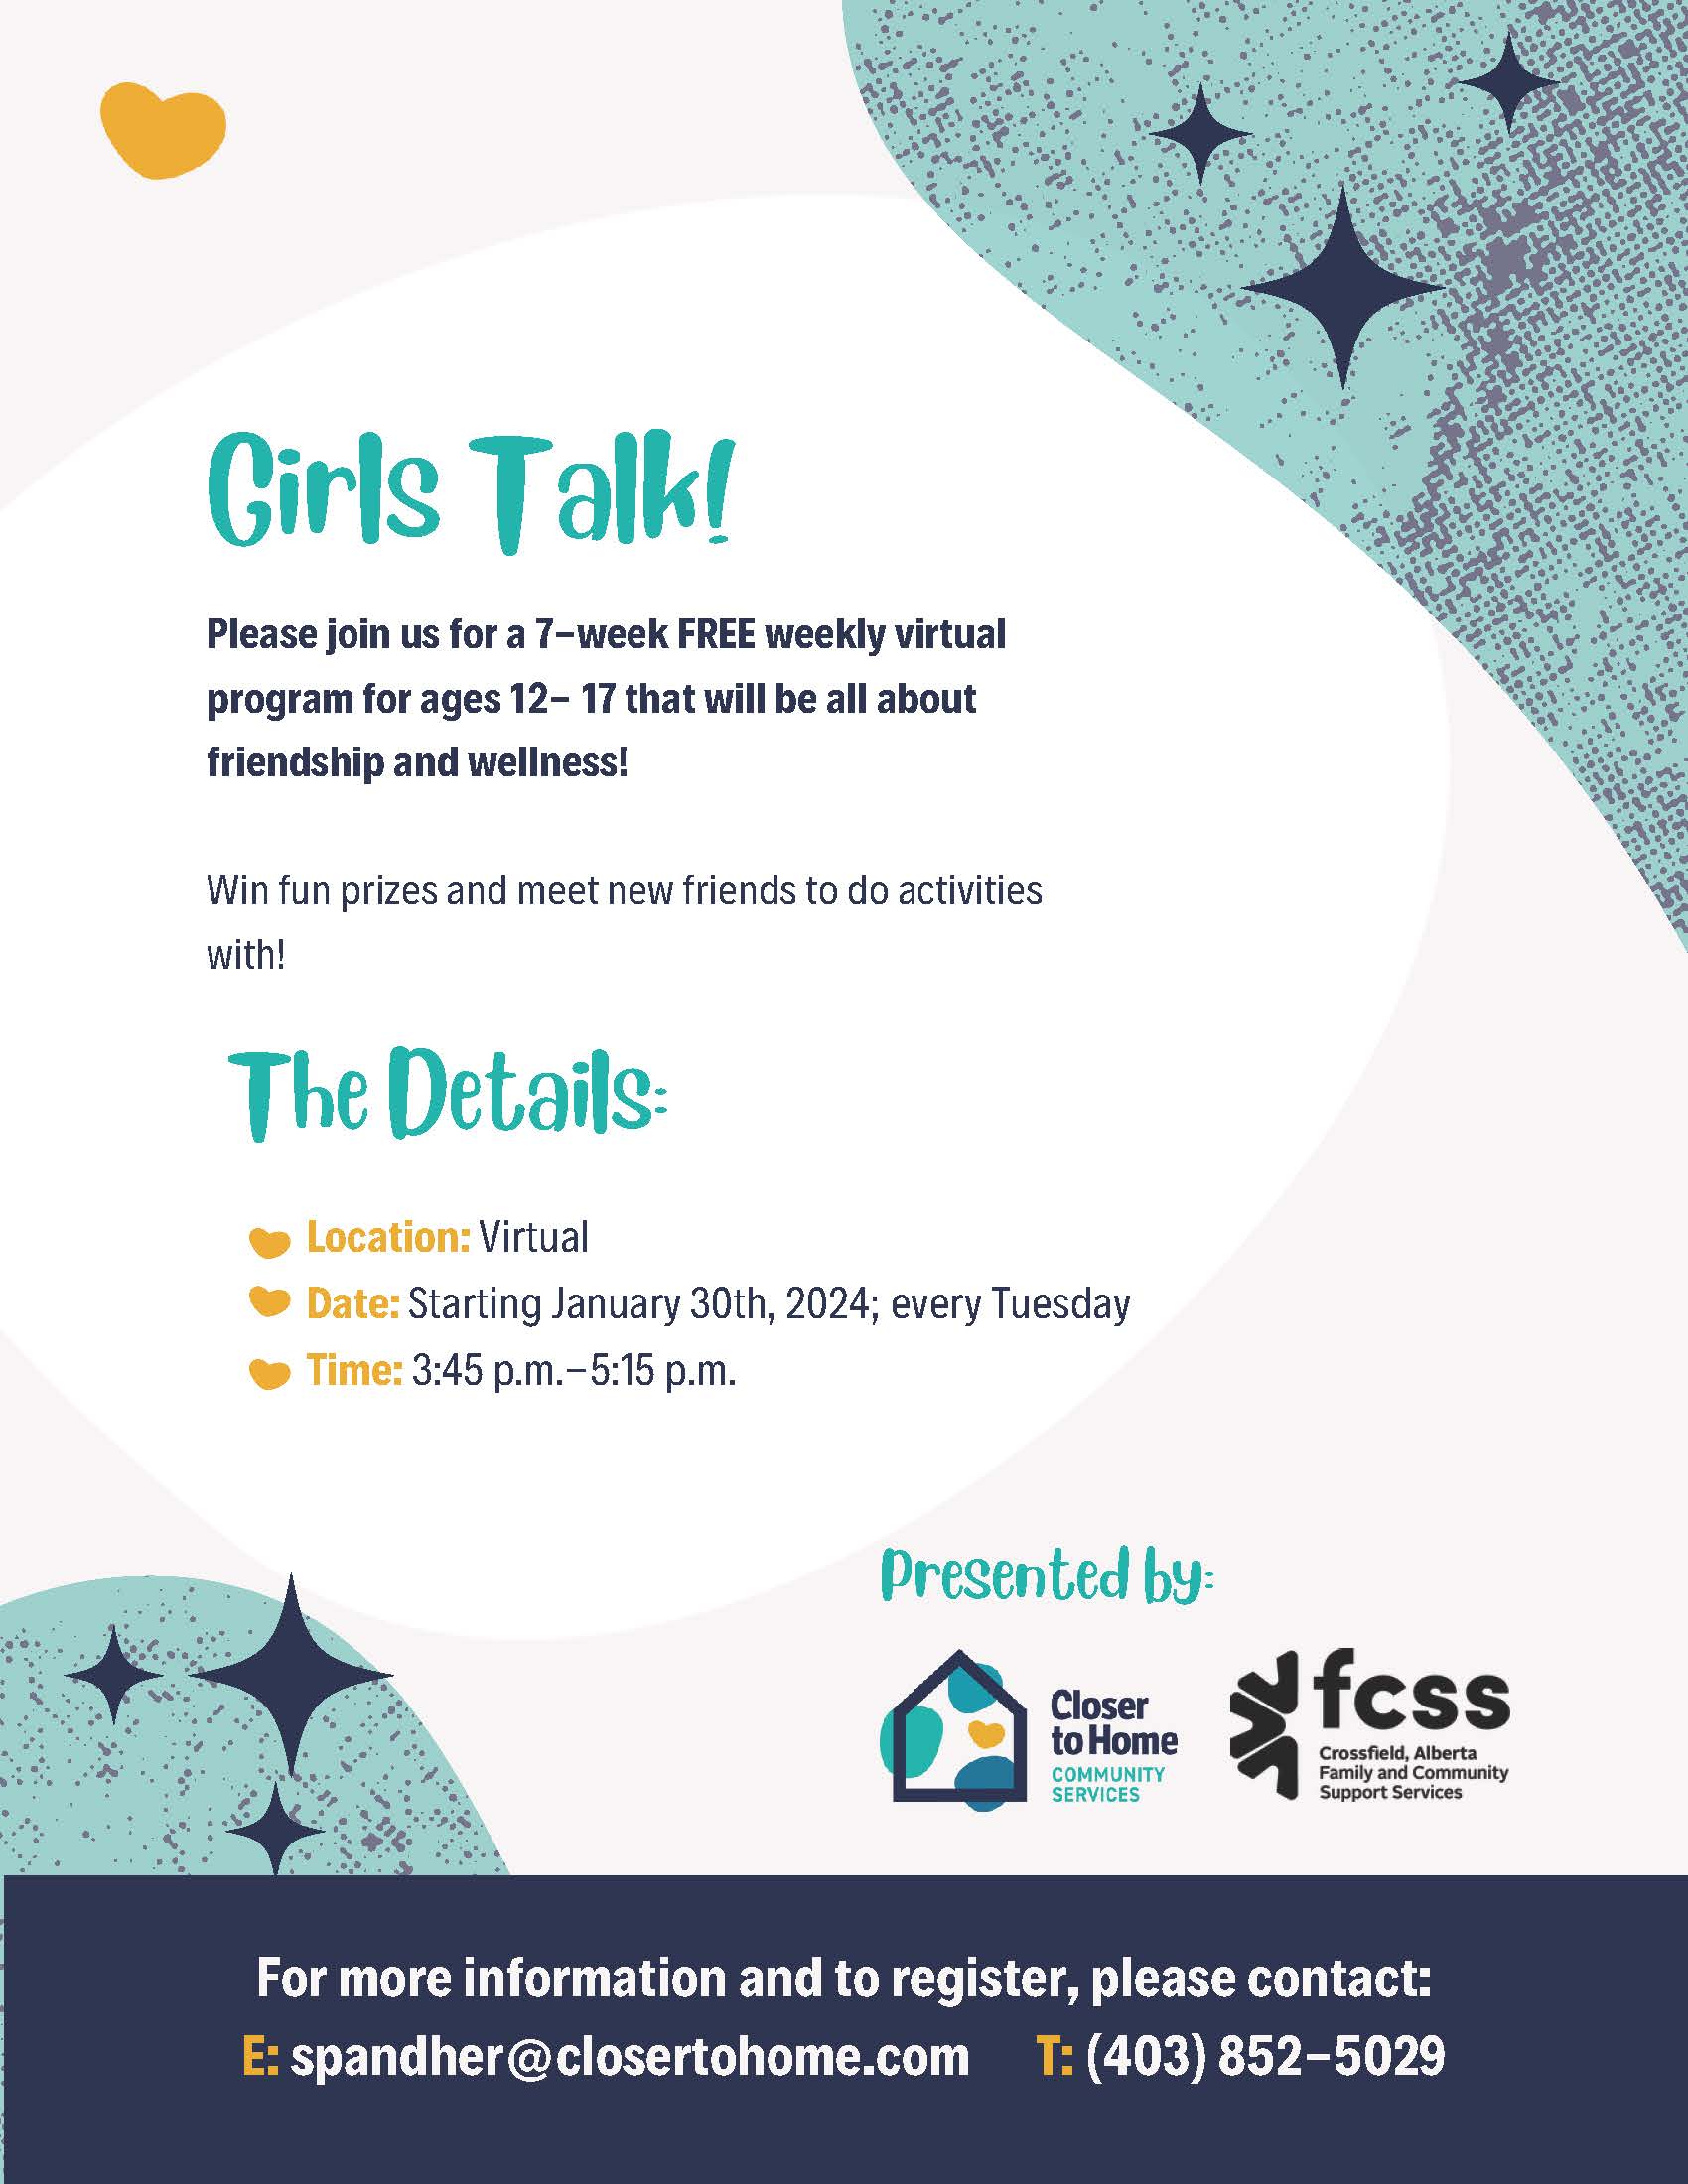 Closer to Home Community Services Girls Talk Virtual. This in-person program is for ages 12 to 17 years old and wewill talk all about friendship, mental health and self-care!